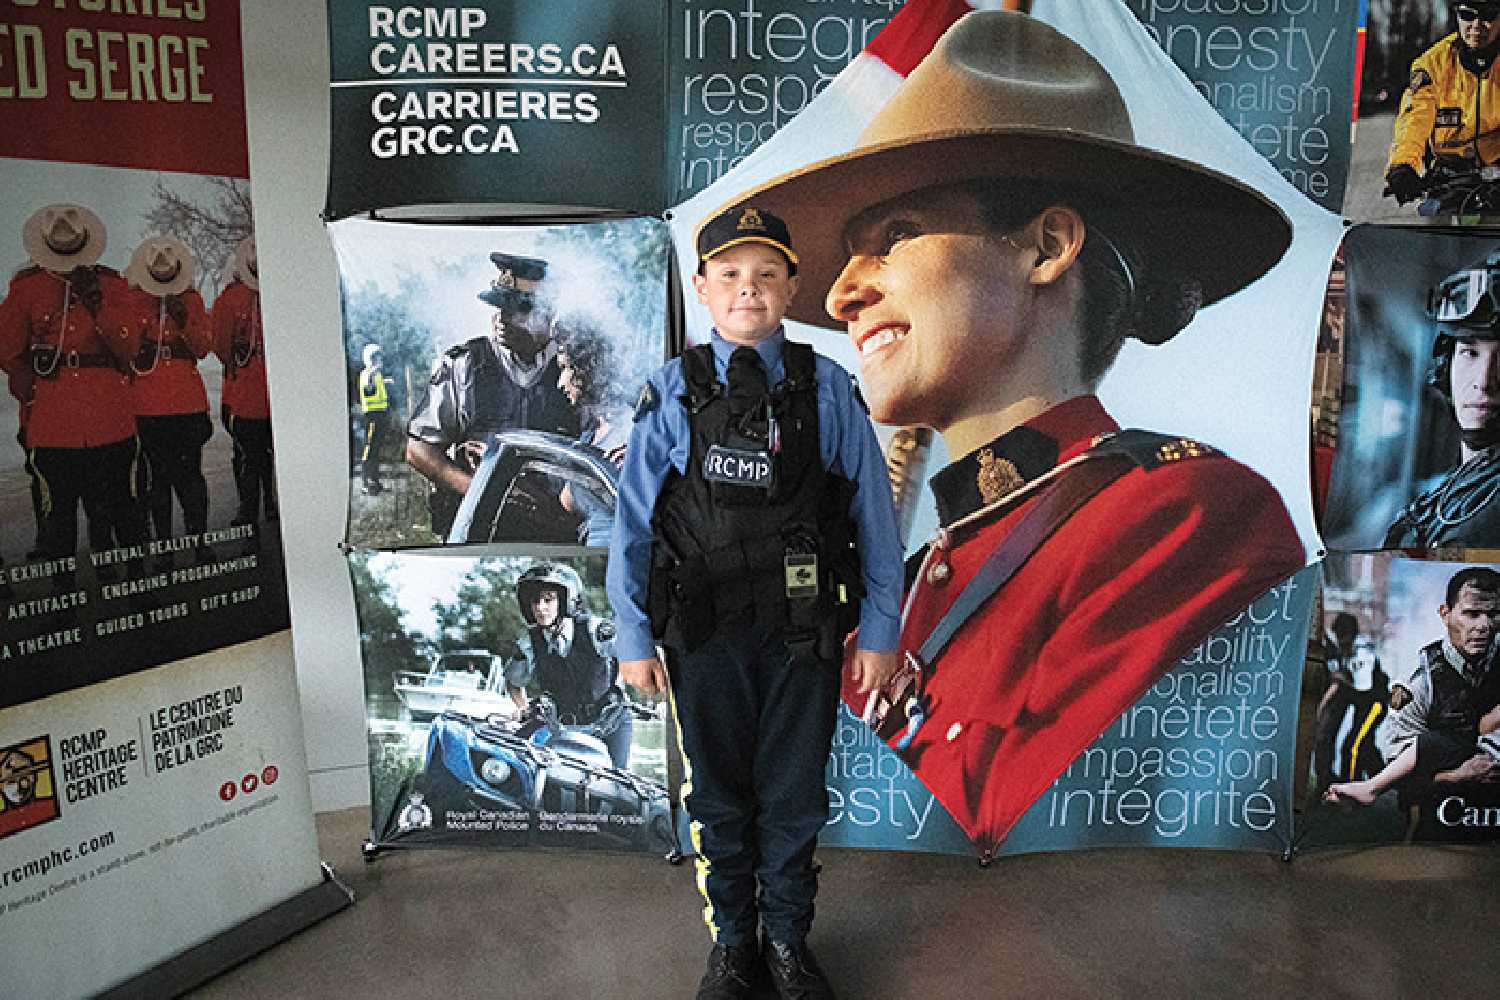 “I want to be an RCMP officer one day. I think it would be really cool to be able to help people and protect people in your community,” said Kohl.